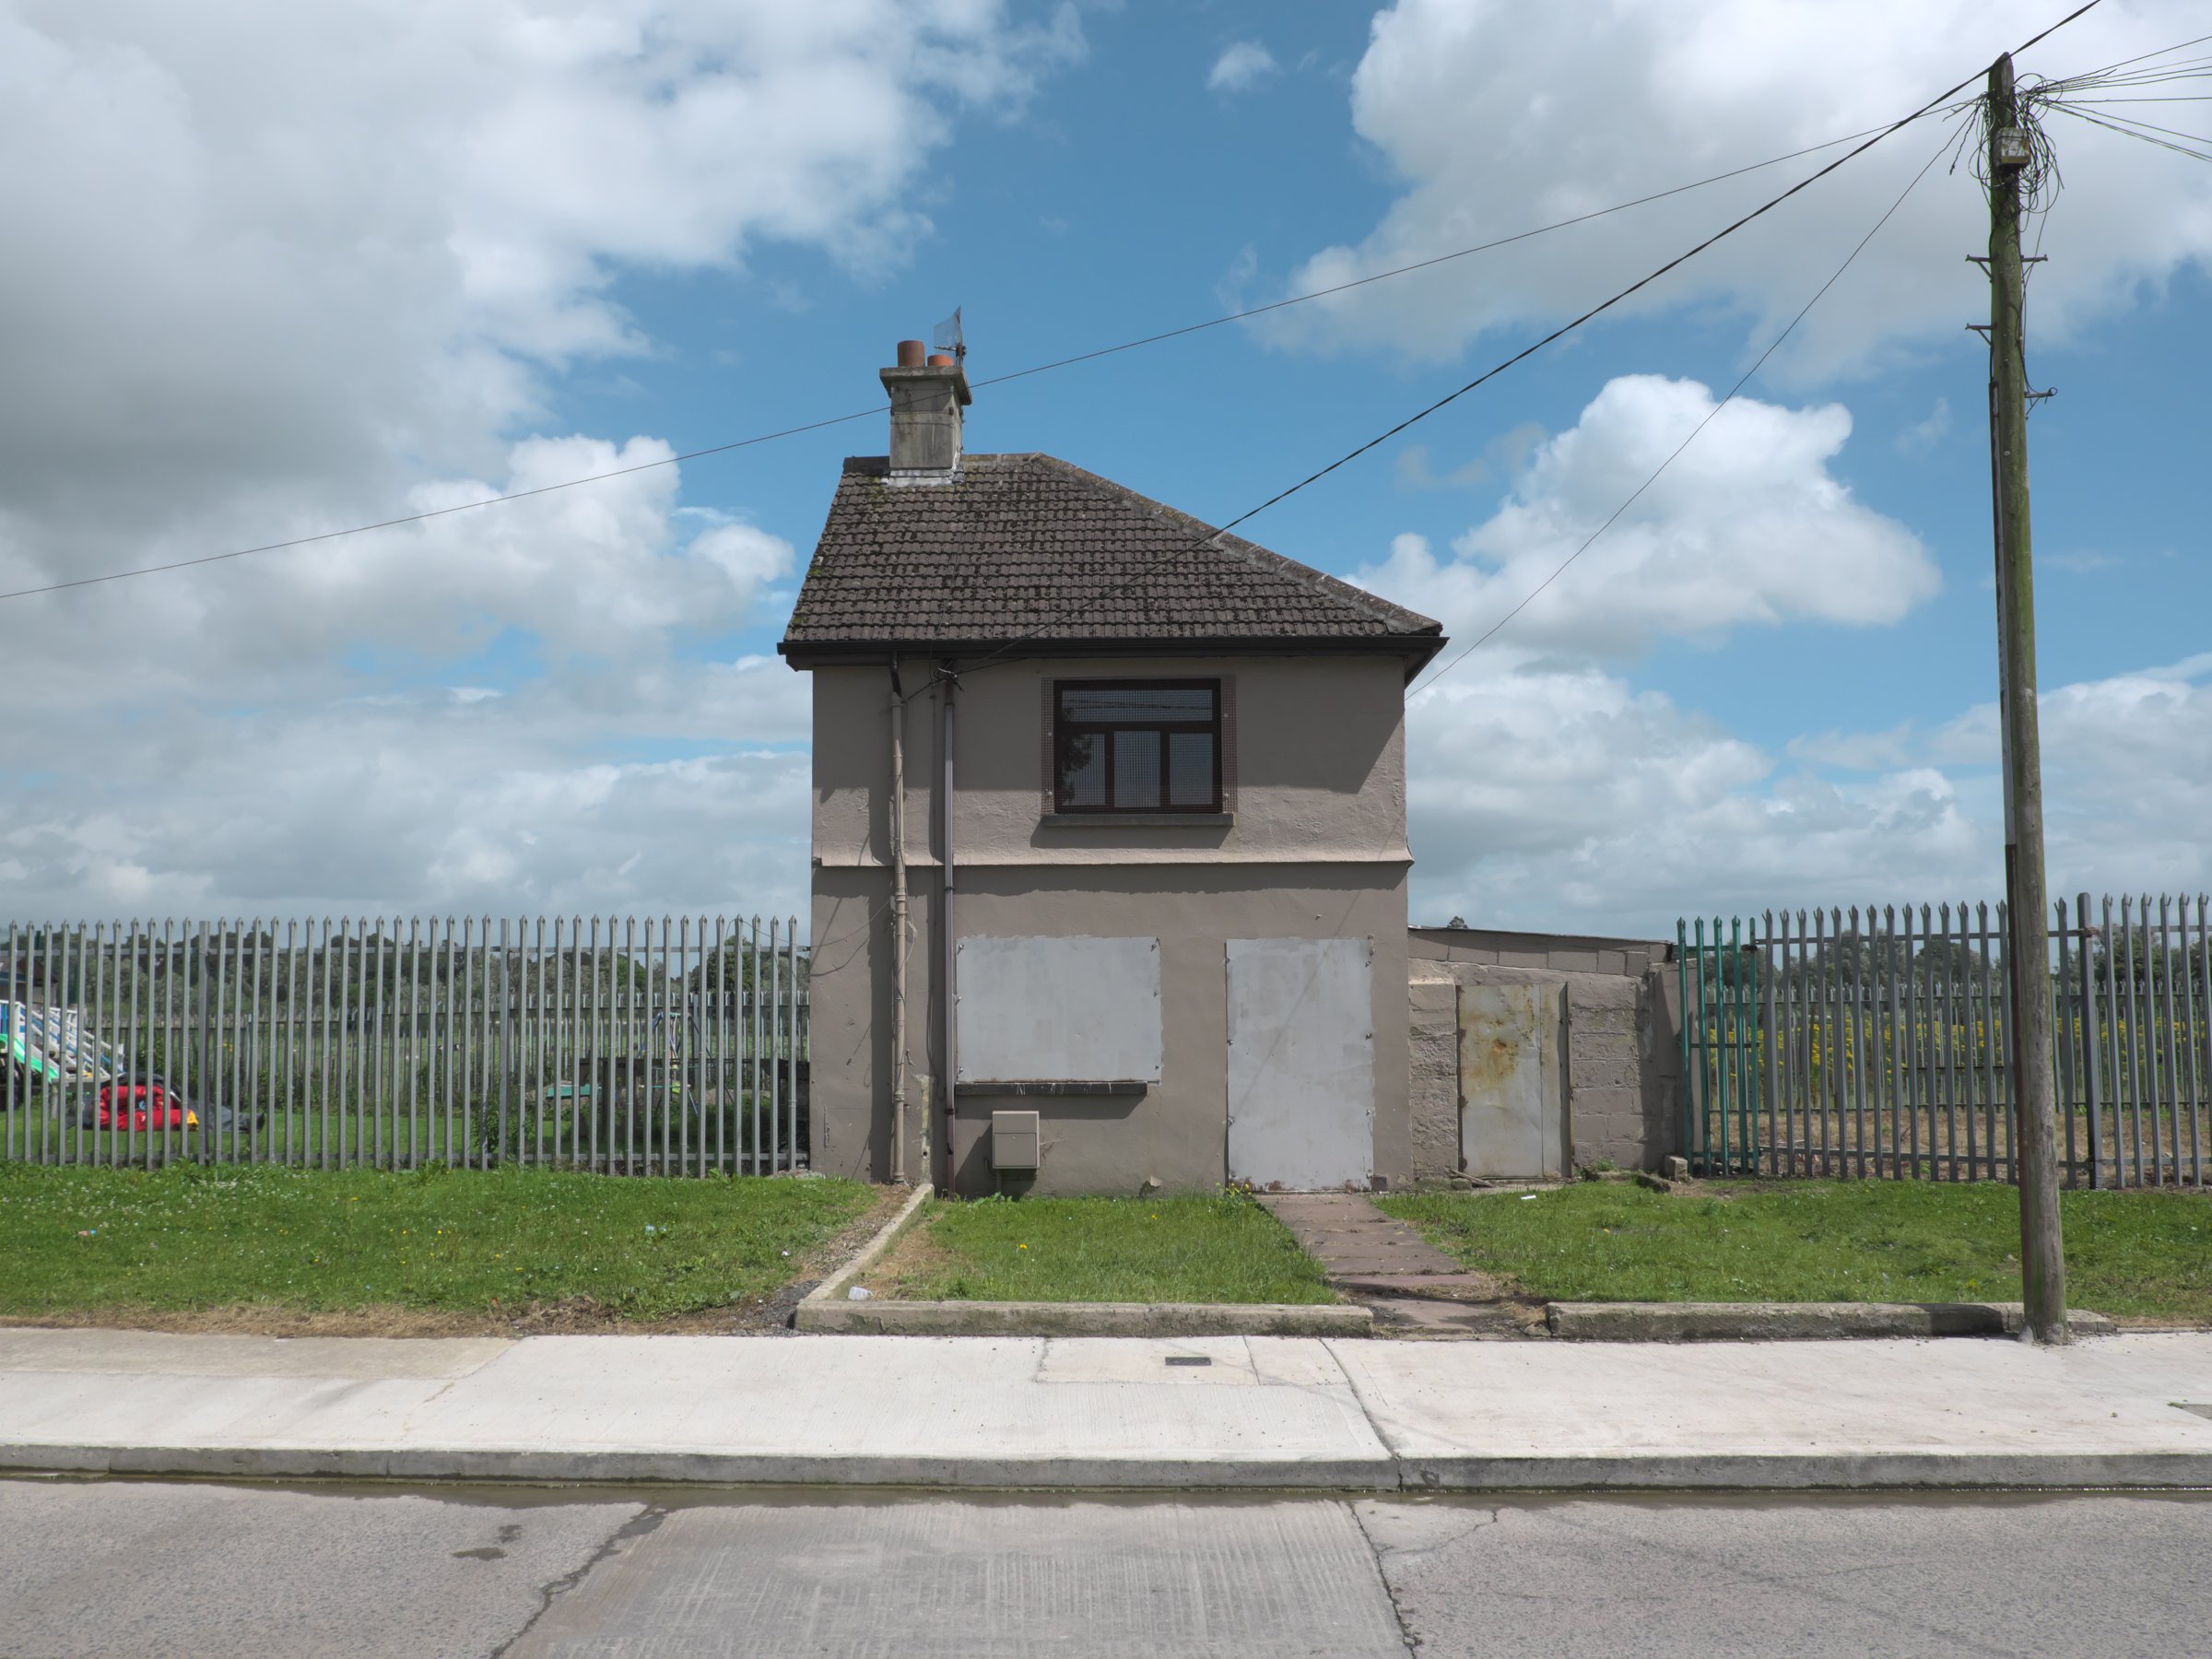 Jamin Keogh, Stand alone house, 2017, from the series Moyross Study.jpg